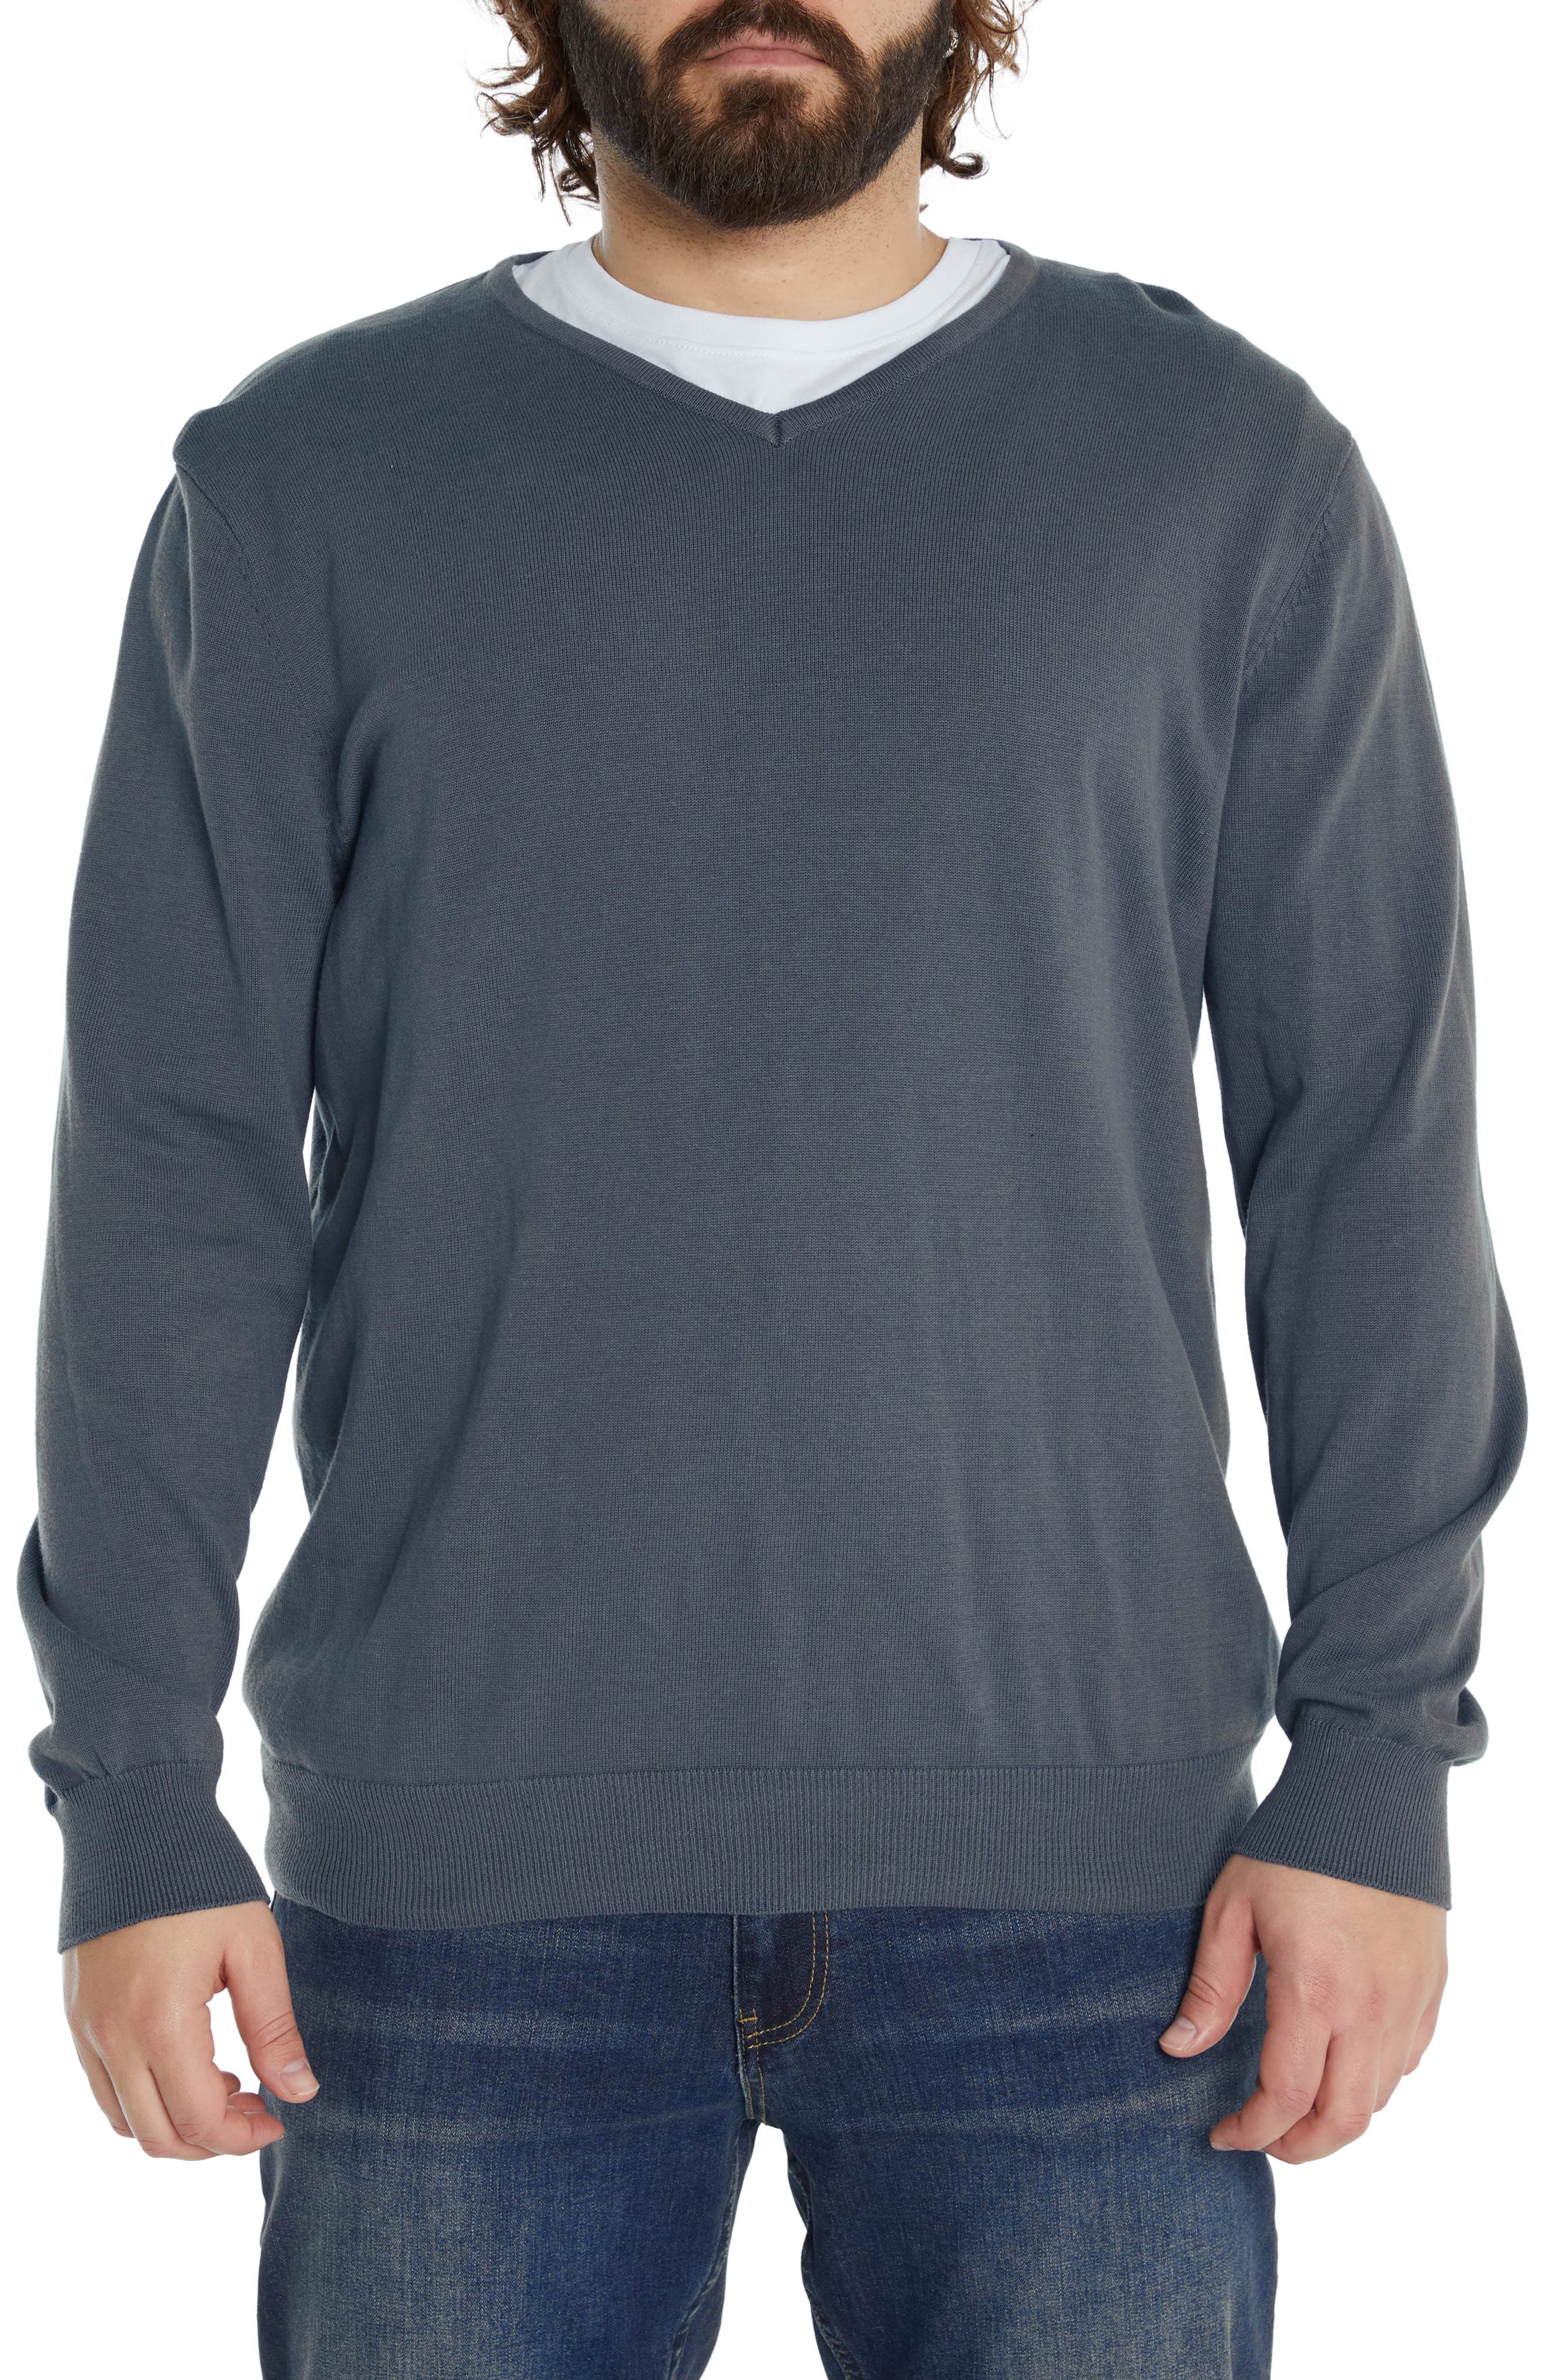 Johnny Bigg Essential V-Neck Sweater in Air Force Blue at Nordstrom